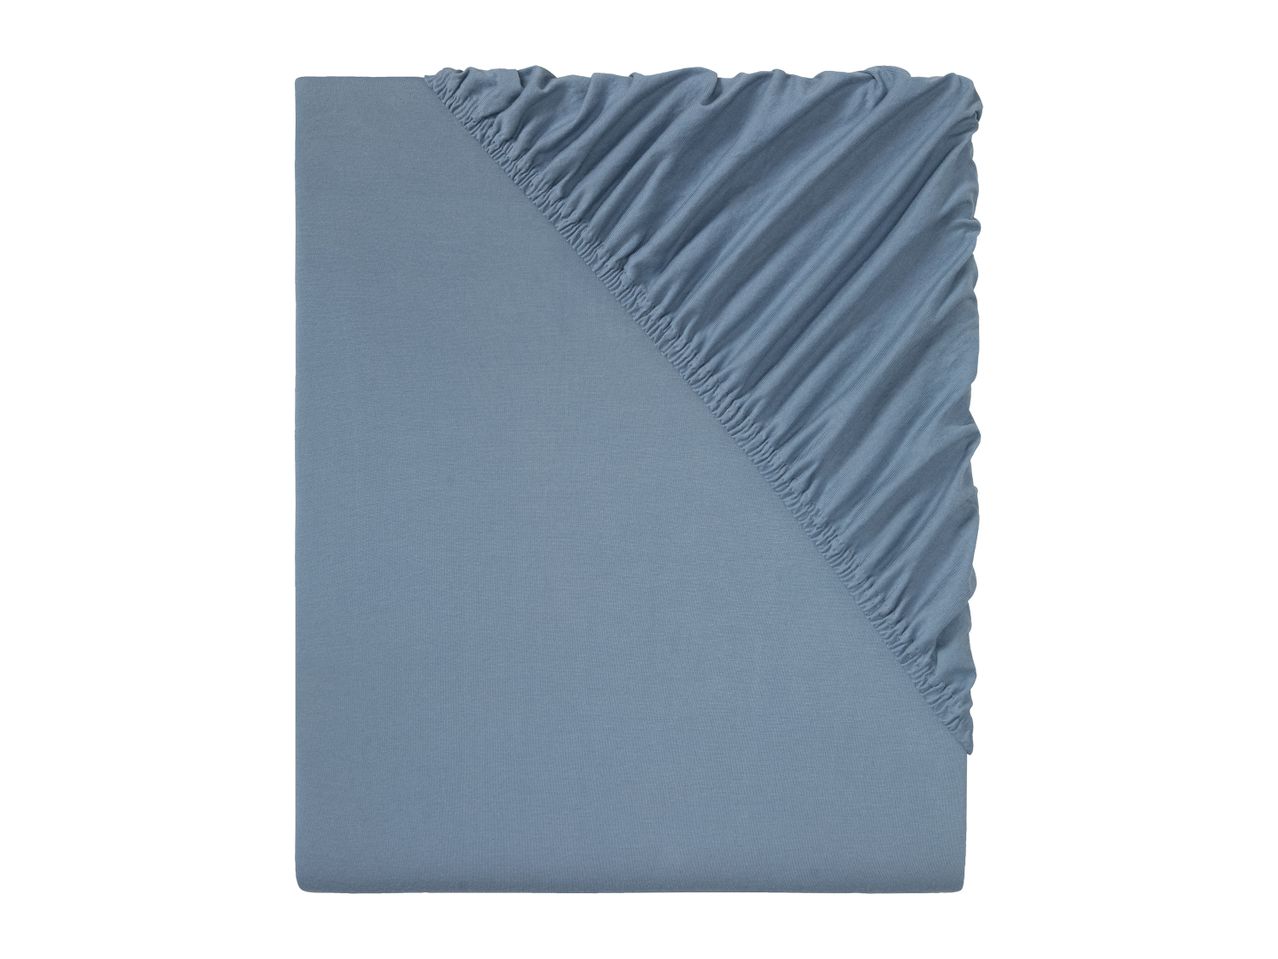 Go to full screen view: Livarno Home Jersey Fitted Sheet - King - Image 1